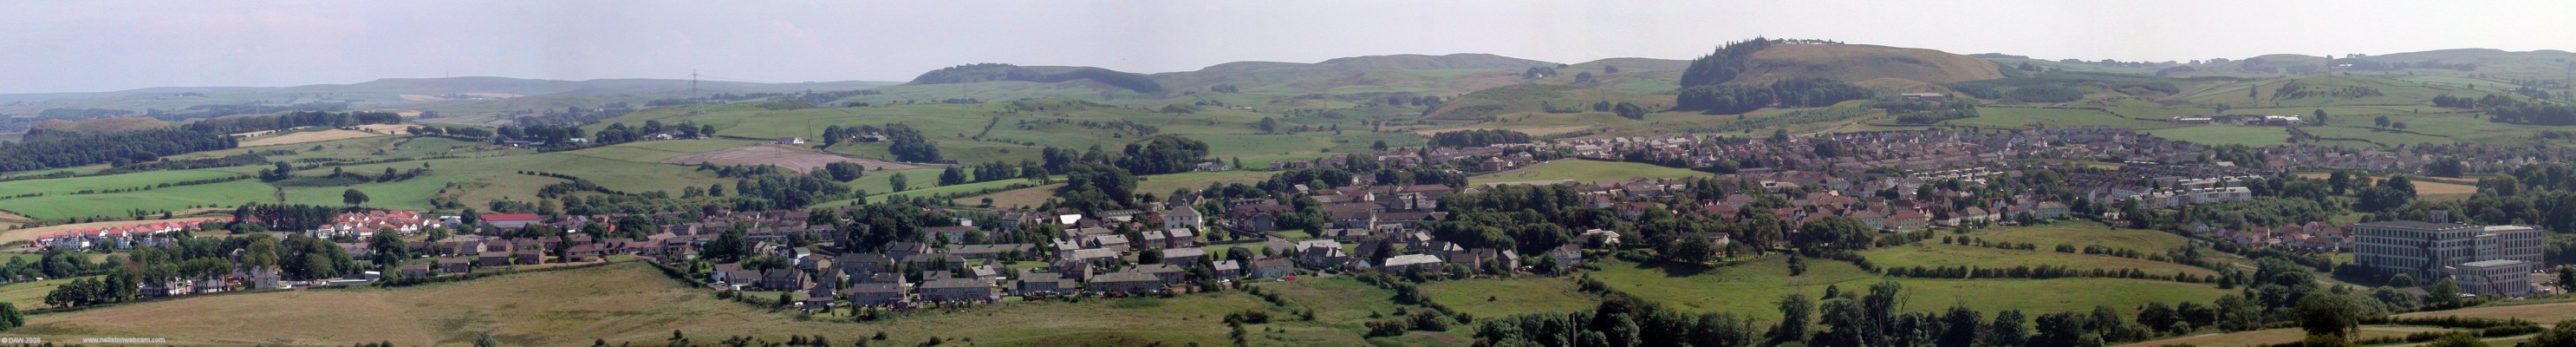 Panoramic view over looking Neilston from the Fereneze Hills
Taken in 2005 this view point shows how the village has developed over the years with the oldest part around the Church followed by the mill and the terraced houses above and all the later developments in between with the latest at the edges.  [url=http://www.streetmap.co.uk/streetmap.dll?G2M?X=247715&Y=658600&A=Y&Z=3/]Map location[/url]
